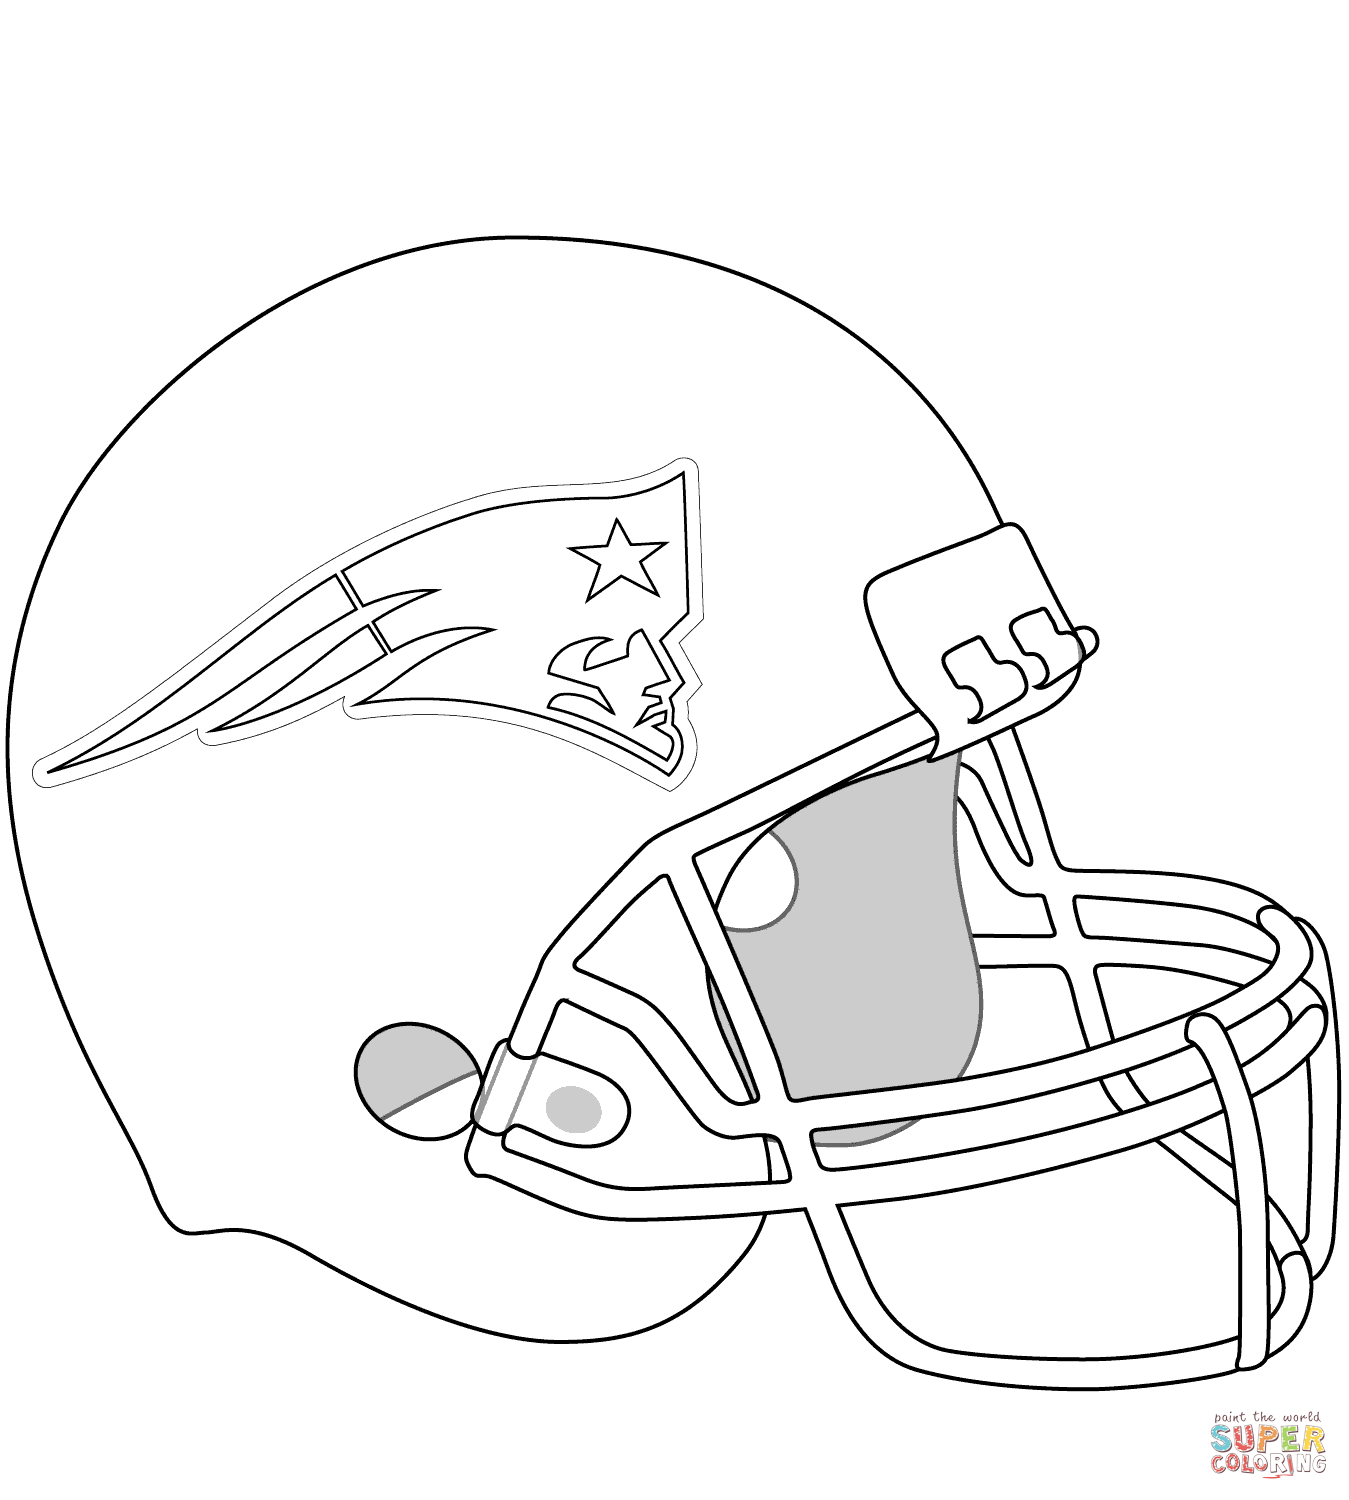 New england patriots helmet coloring page free printable coloring pages